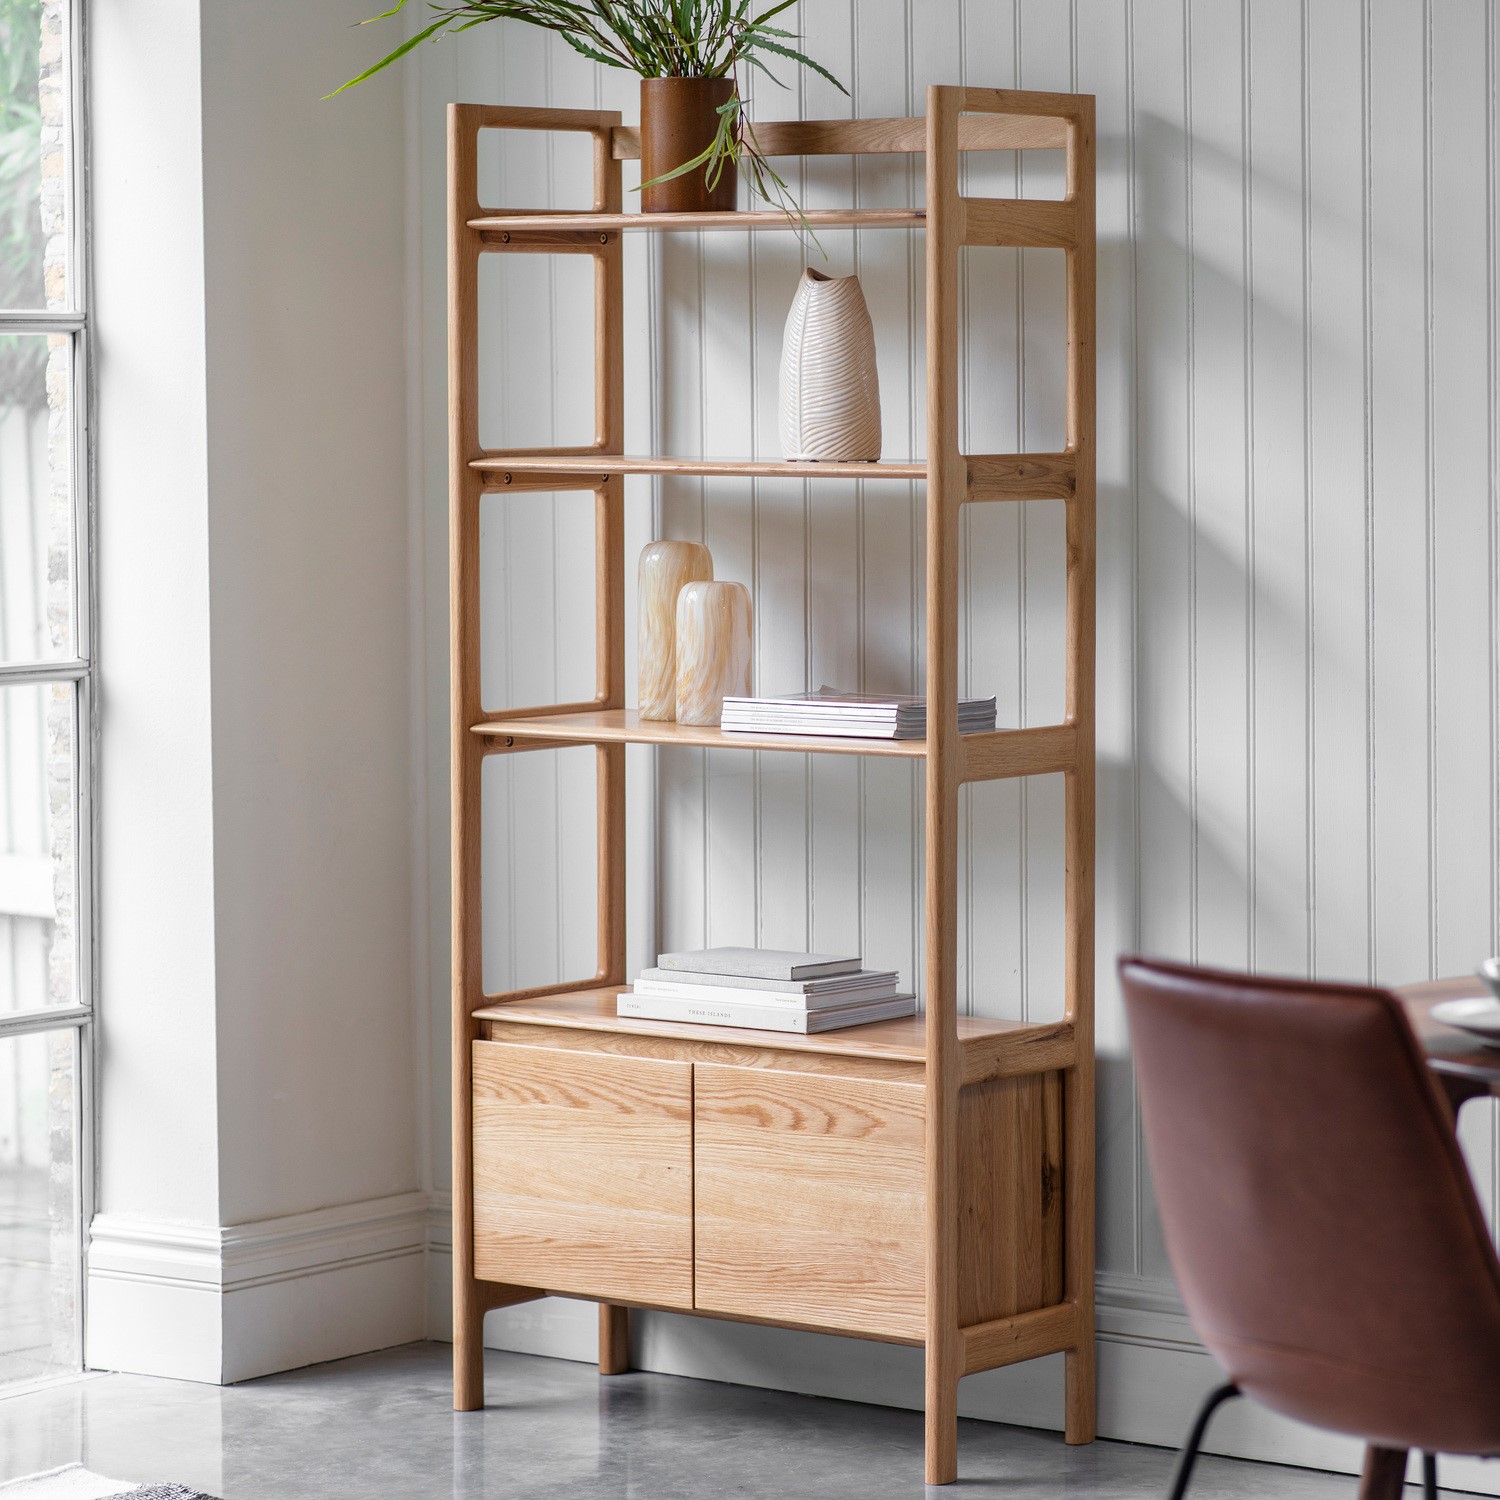 Read more about Madrid soild oak bookcase with storage caspian house